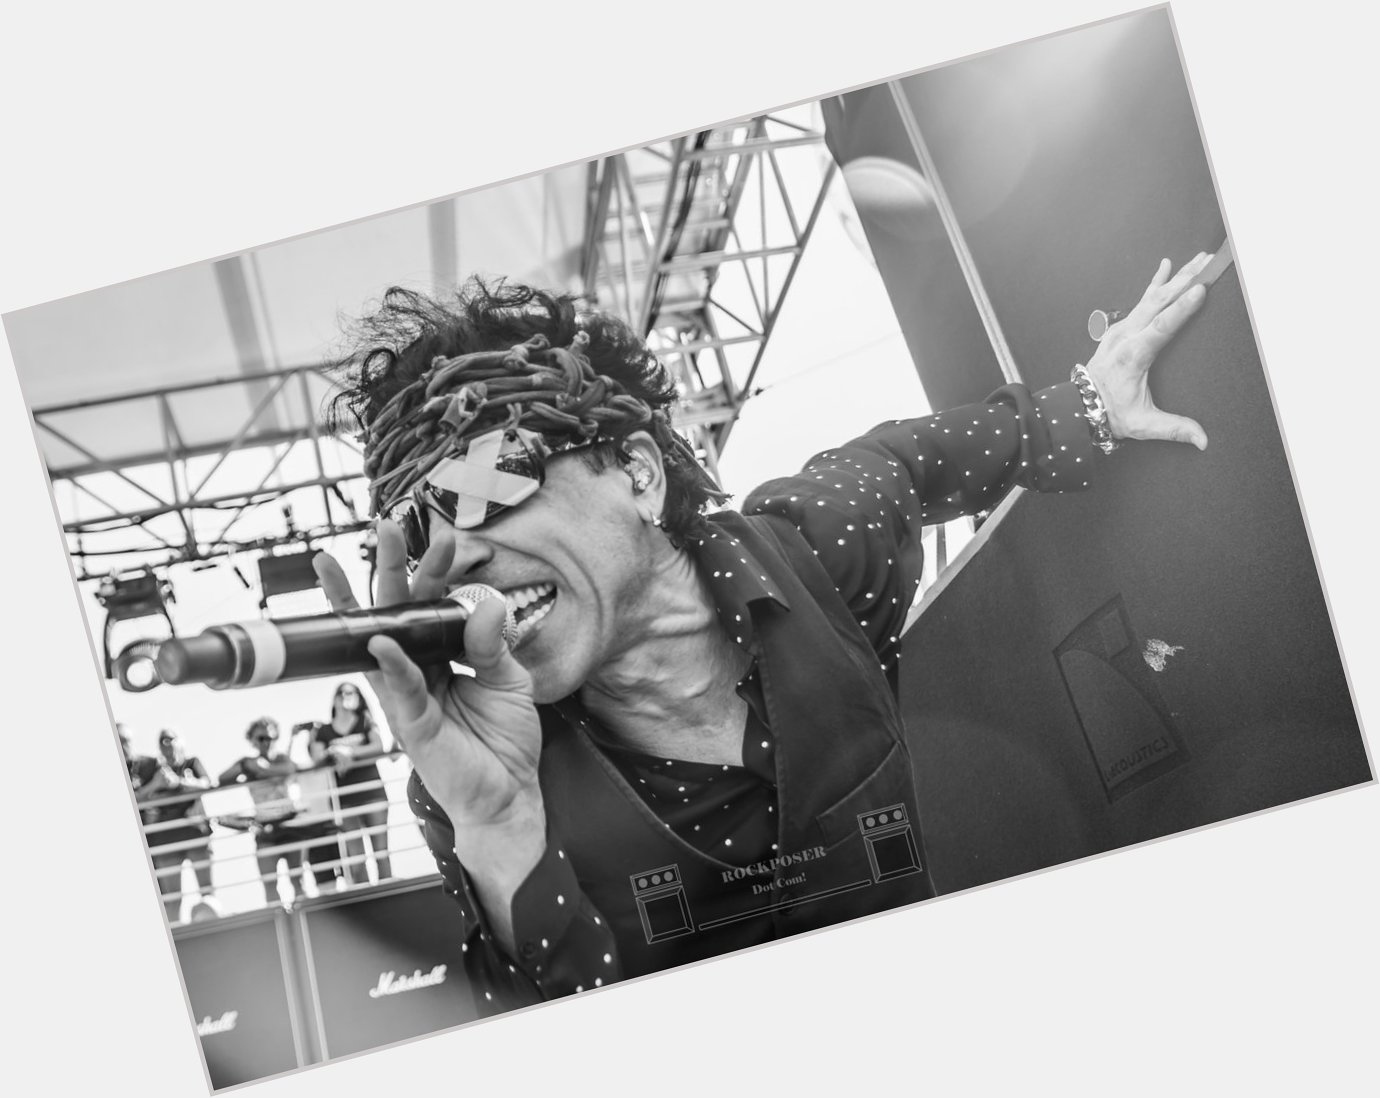 Happy Birthday to Extreme\s Gary Cherone, seen here Monsters Of Rock Cruise 2020 